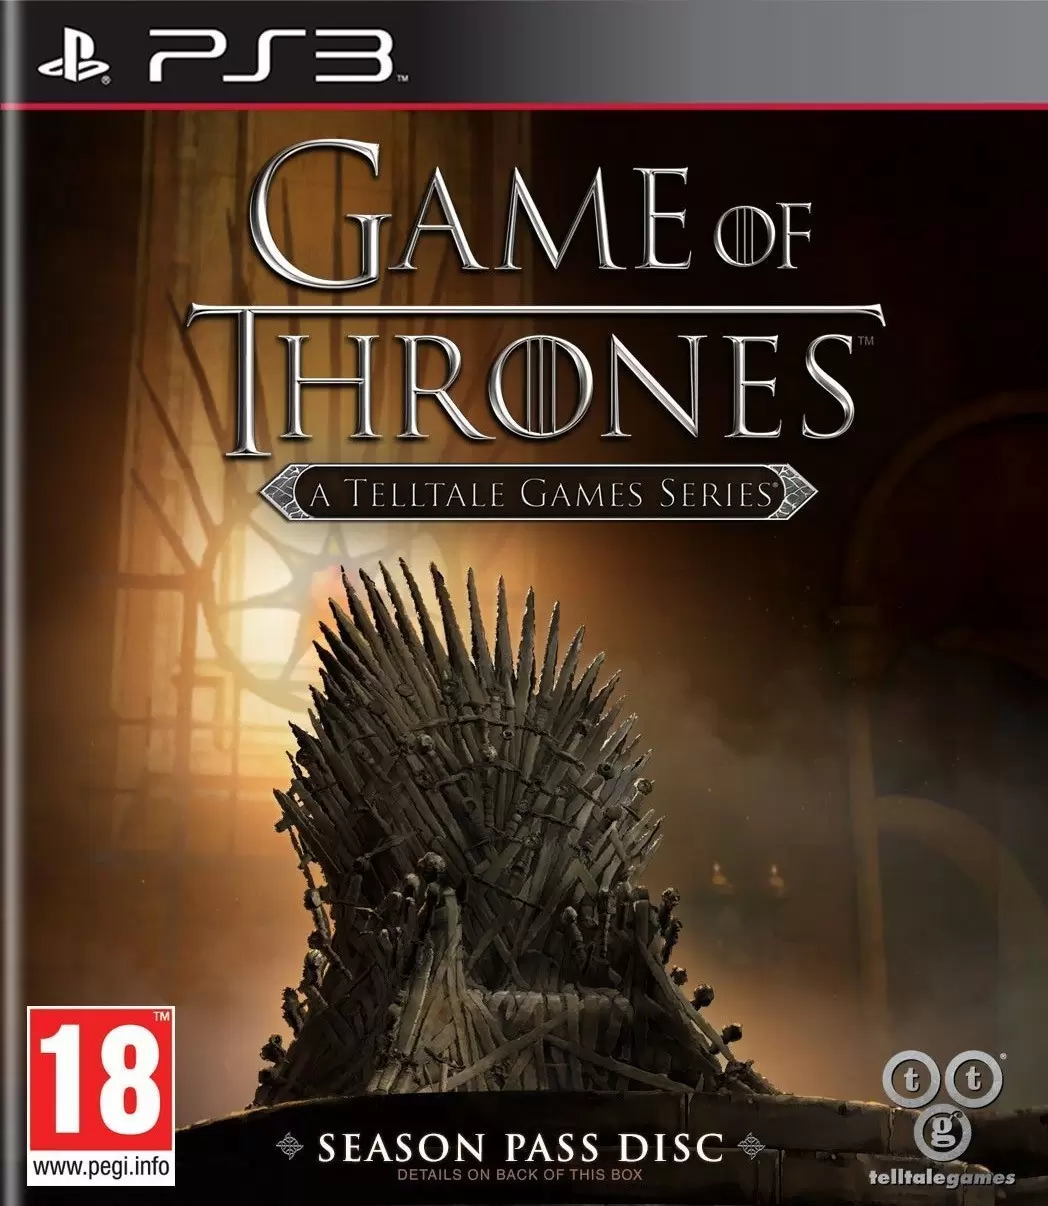 PS3 Games - Game of Thrones: A Telltale Games Series